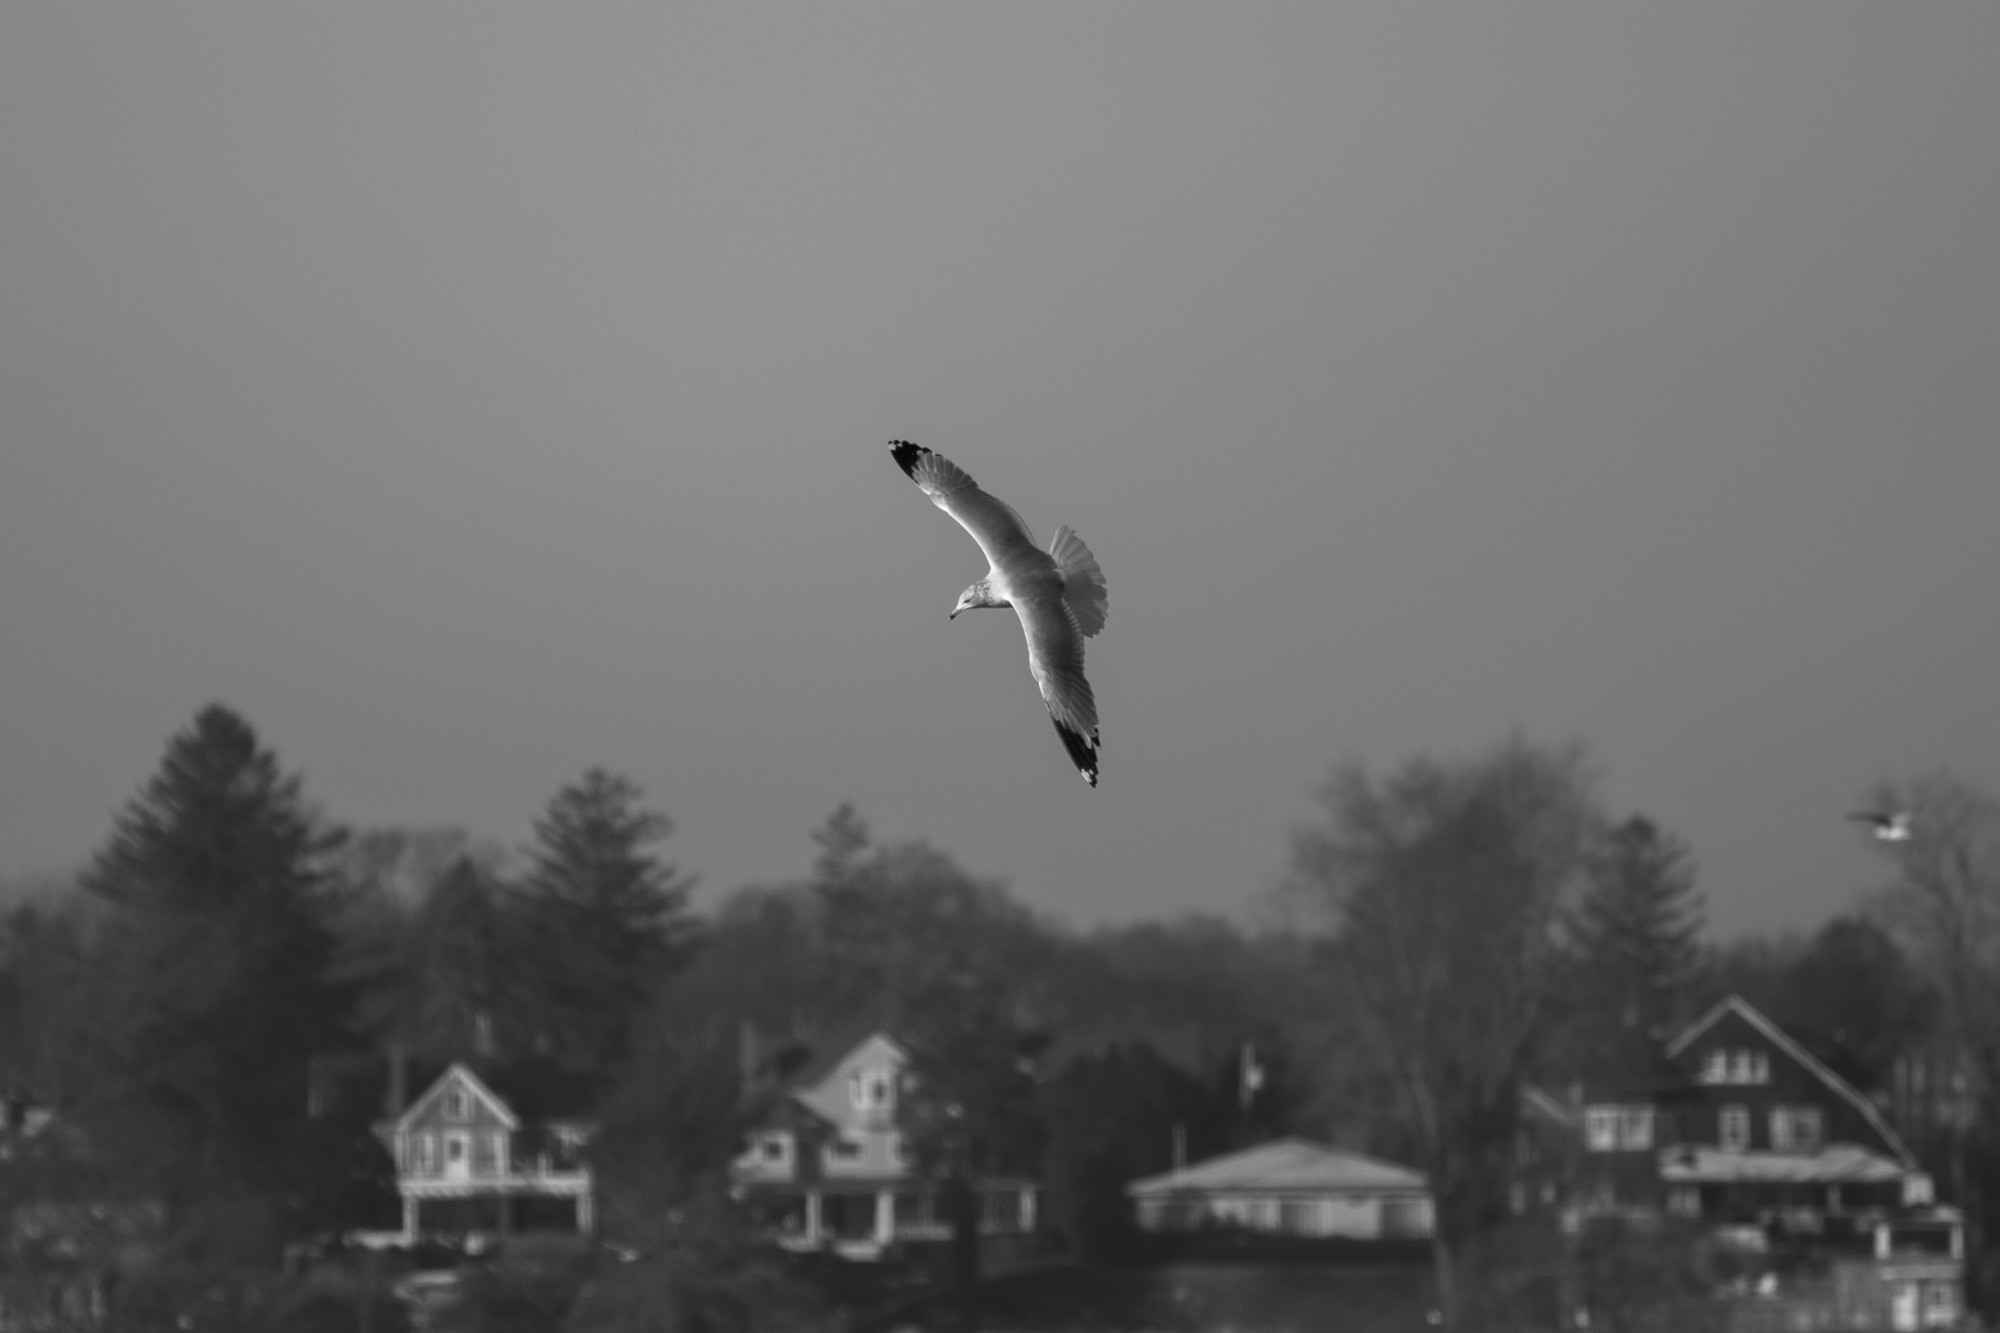 seagull flying wings out flat, with the shore behind just out of focus in black and white